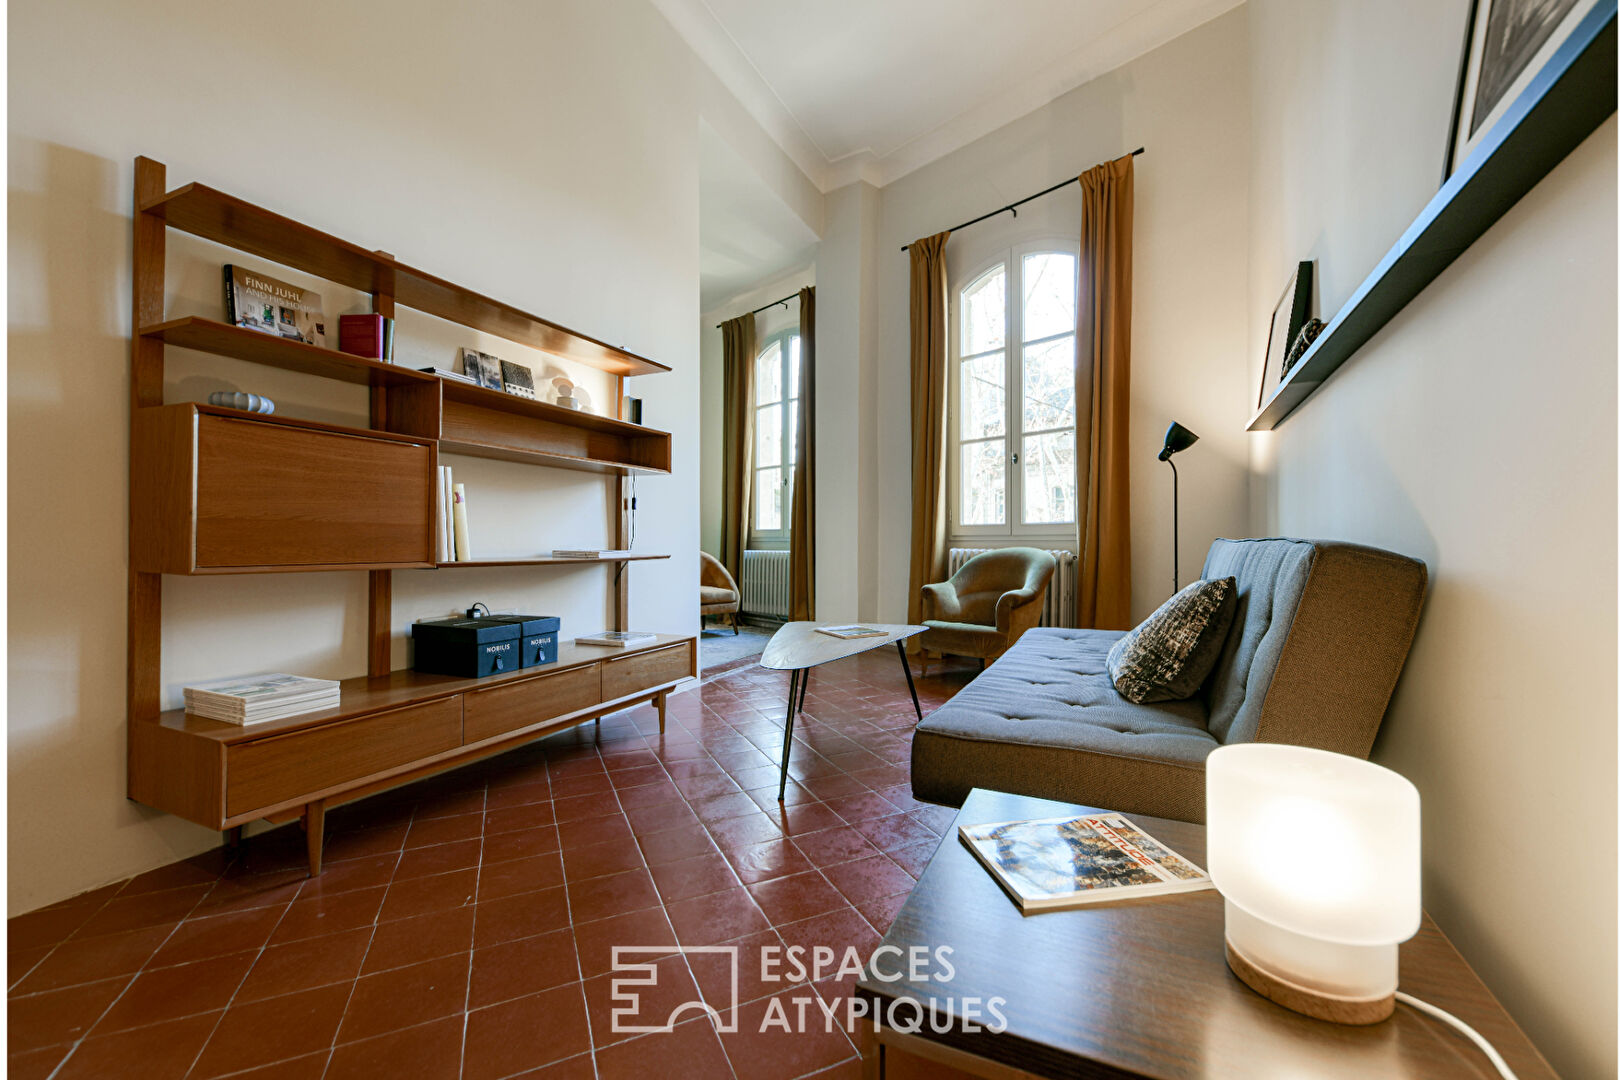 Superb restoration in the heart of the historic center of Uzès